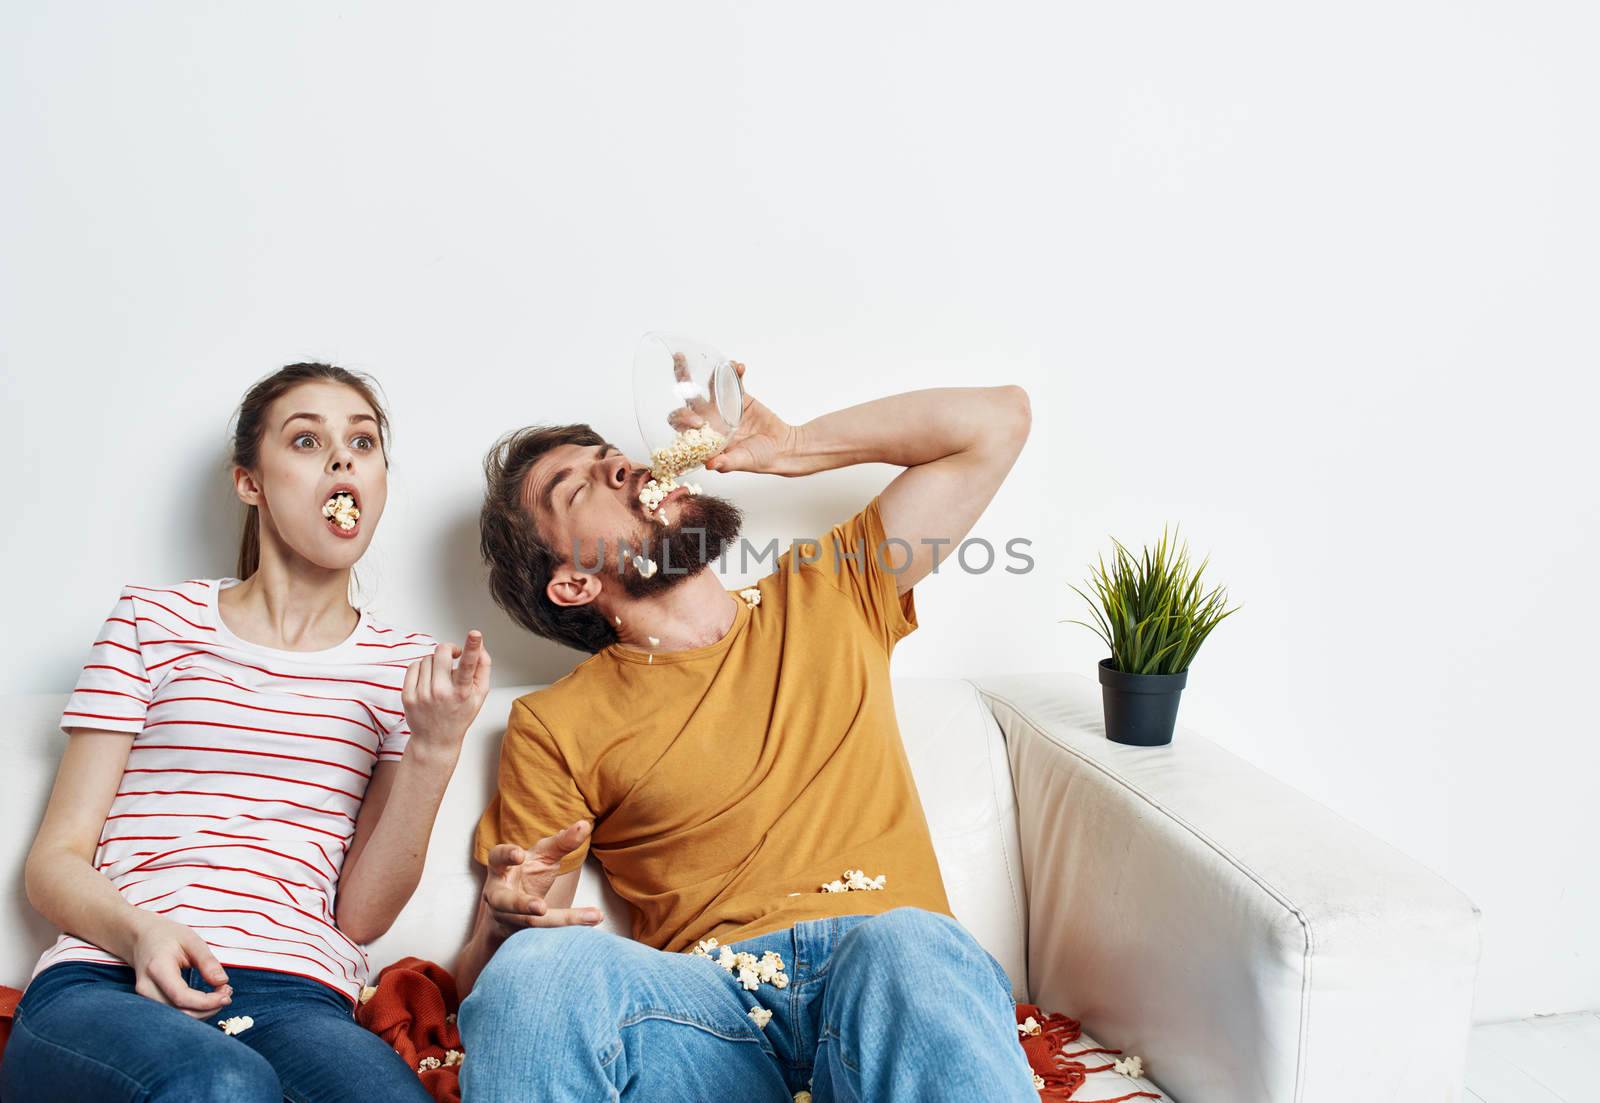 Man and woman watching movies indoors with popcorn and flower in a pot. High quality photo